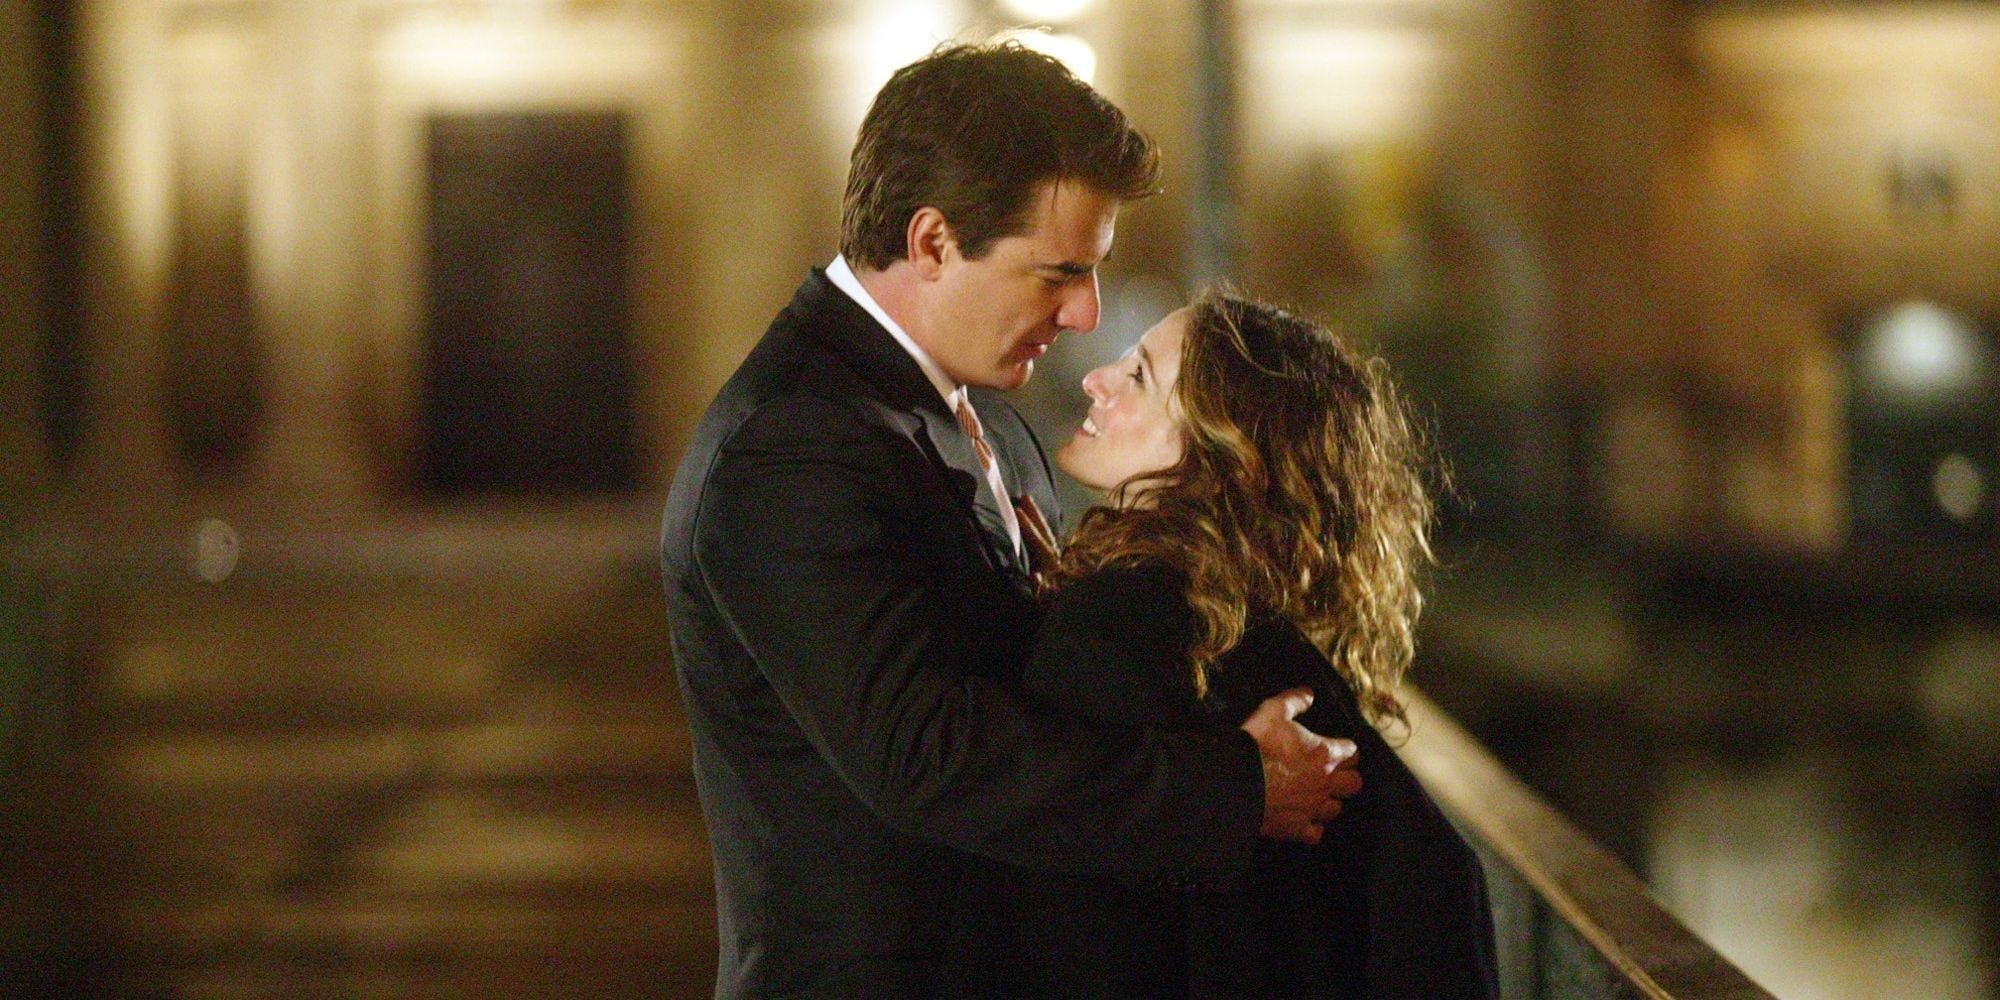 Carrie Bradshaw & 9 Other Sarah Jessica Parker Roles You Need To See